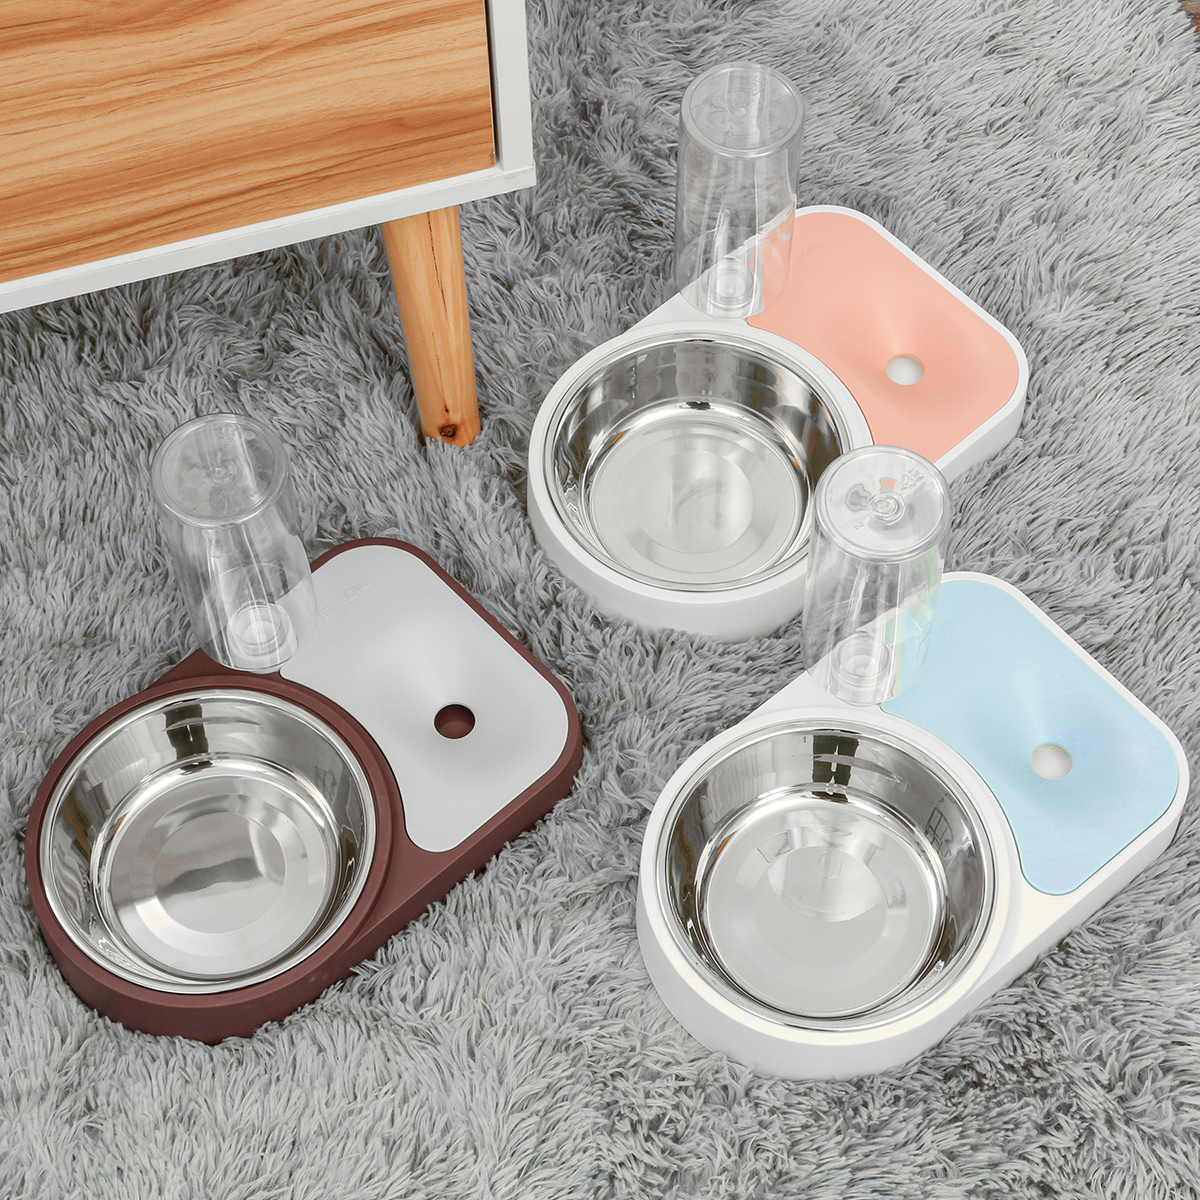 Automatic-Water-Food-Feeder-Cat-Food-Bowl-500ML-Water-Refill-Bottle-Pet-Dog-Anti-Vomiting-Cat-Dish-1881213-6